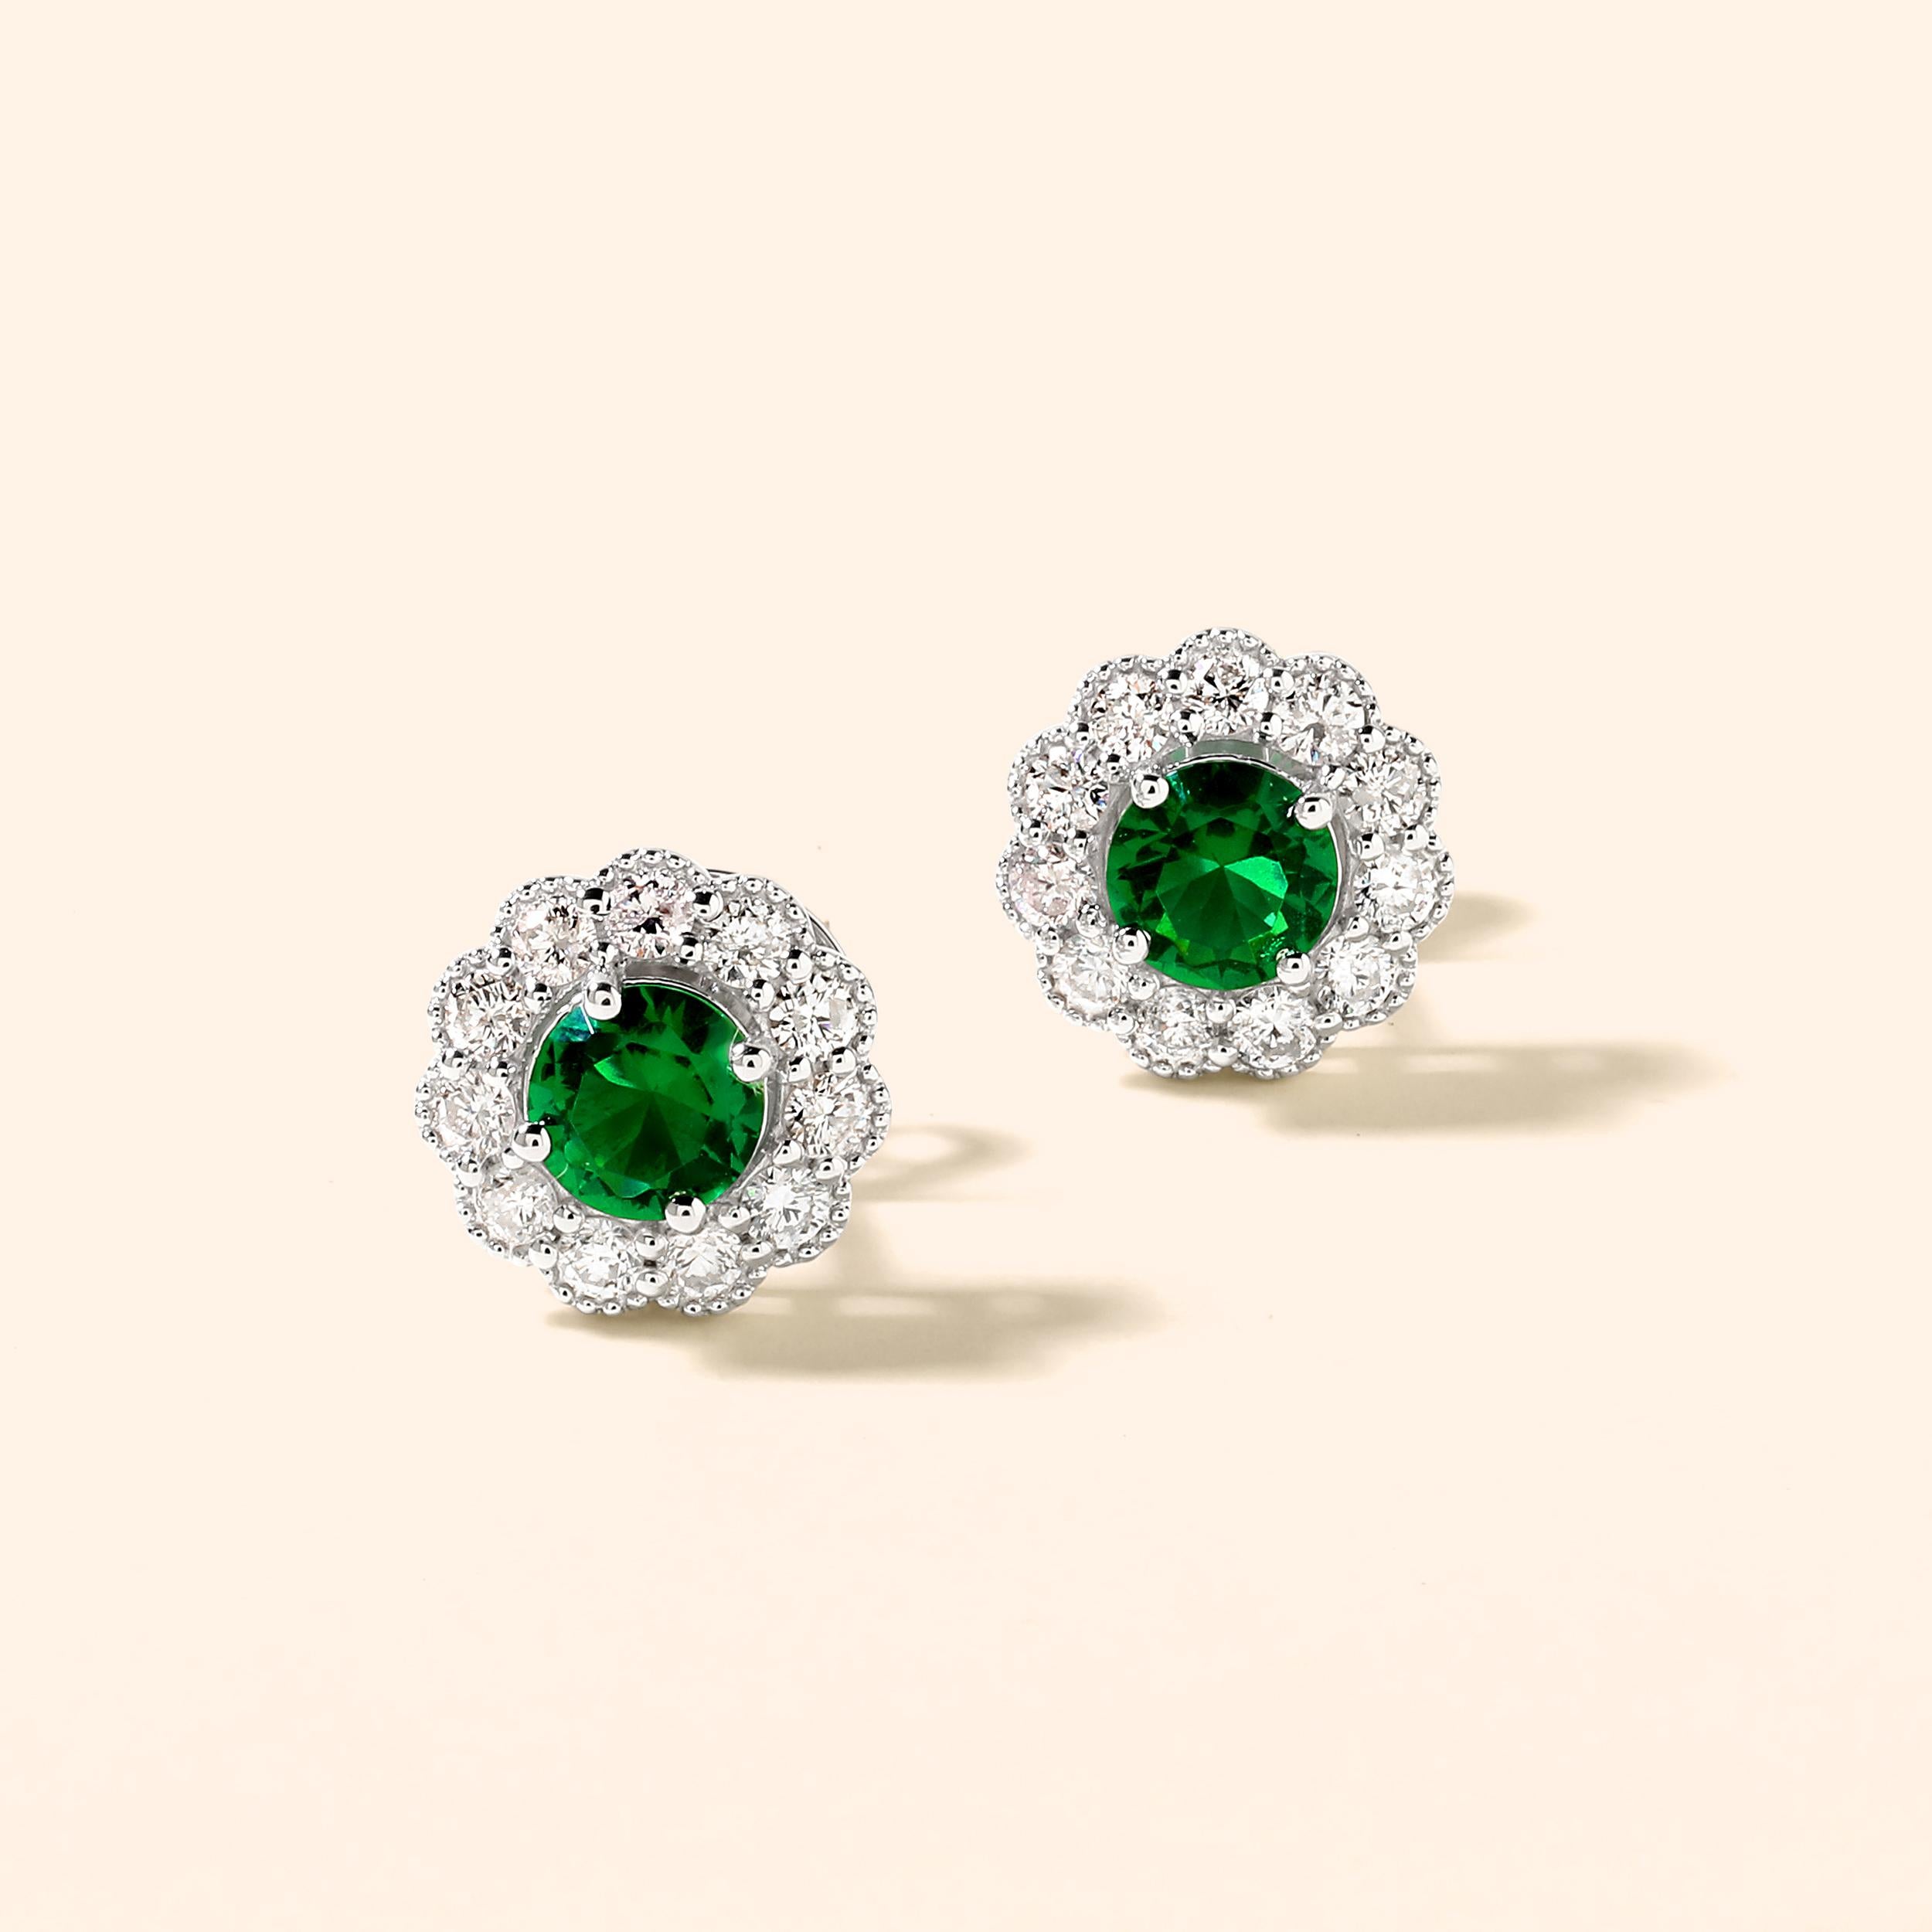 Crafted in 3.35 grams of 14K White Gold, the earrings contains 22 stones of Round Diamonds with a total of 0.62 carat in F-G color and I1-I2 clarity combined with 2 stones of Lab Created Emerald Gemstone with a total of 0.74 carat.

This jewelry